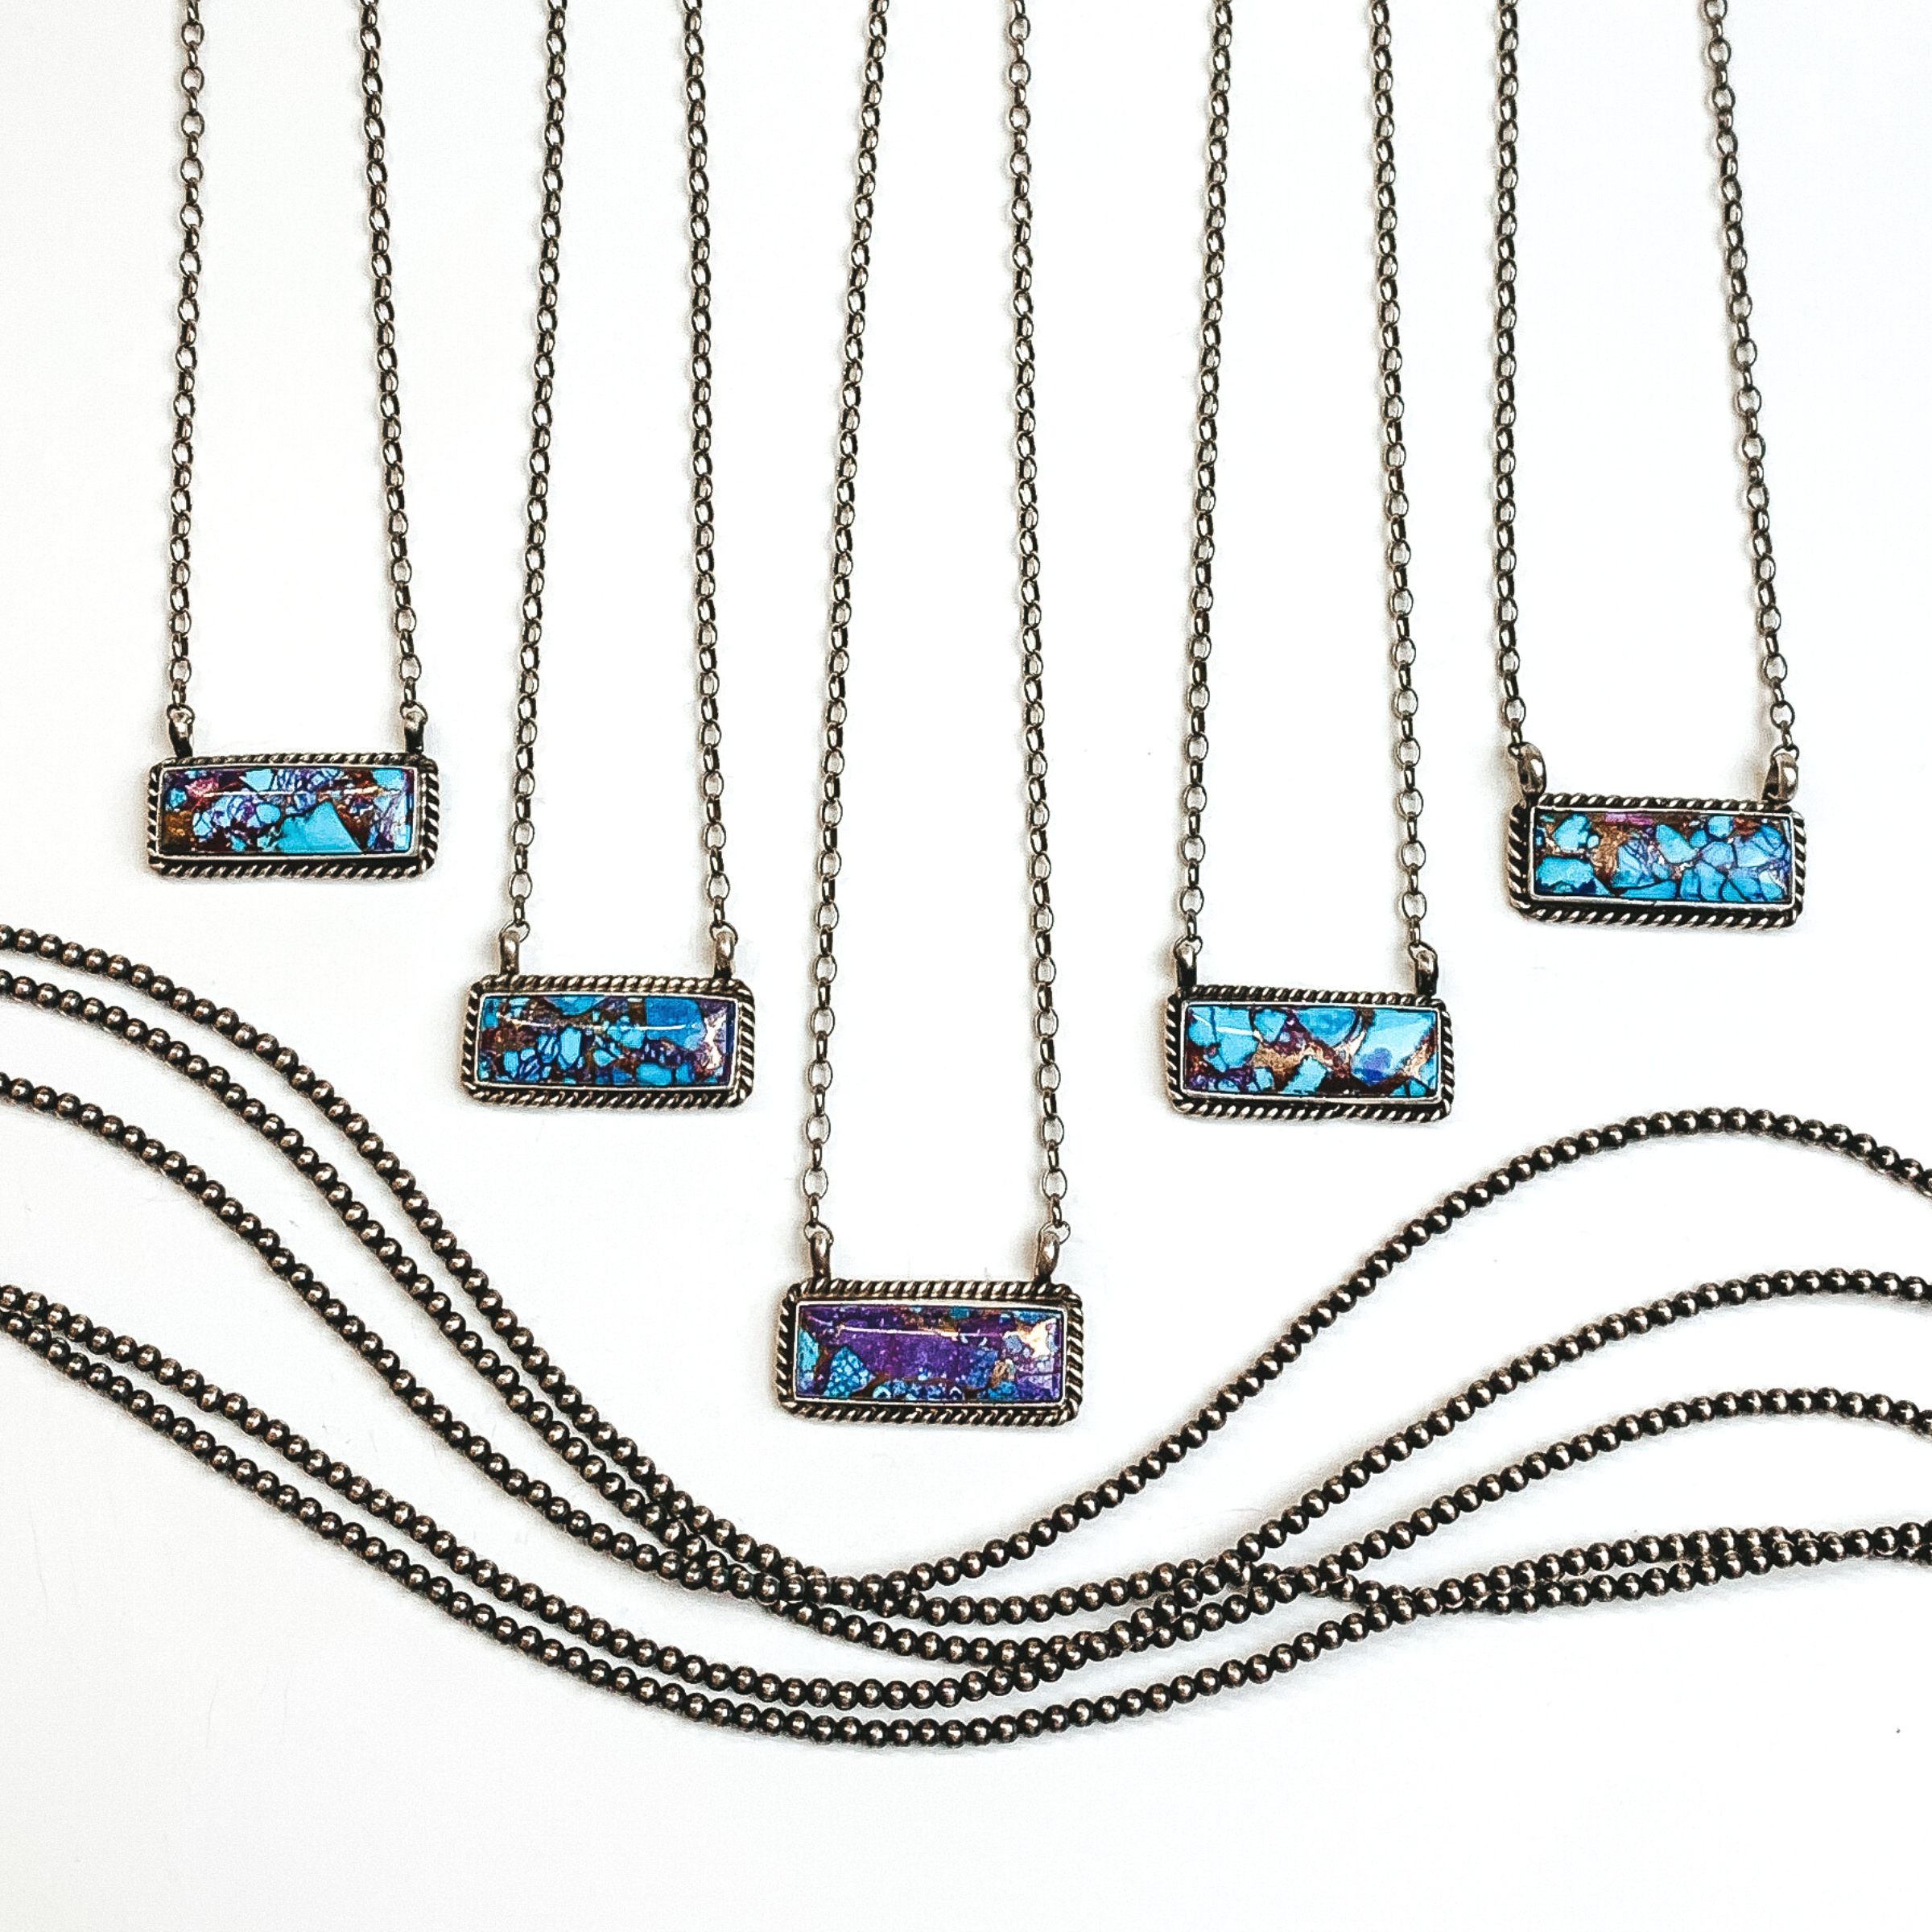 Four silver chain necklaces with rectangle bars that have a purple mojave and turquoise remix stone. These necklaces are pictured on a white background with silver beads under the necklaces. 